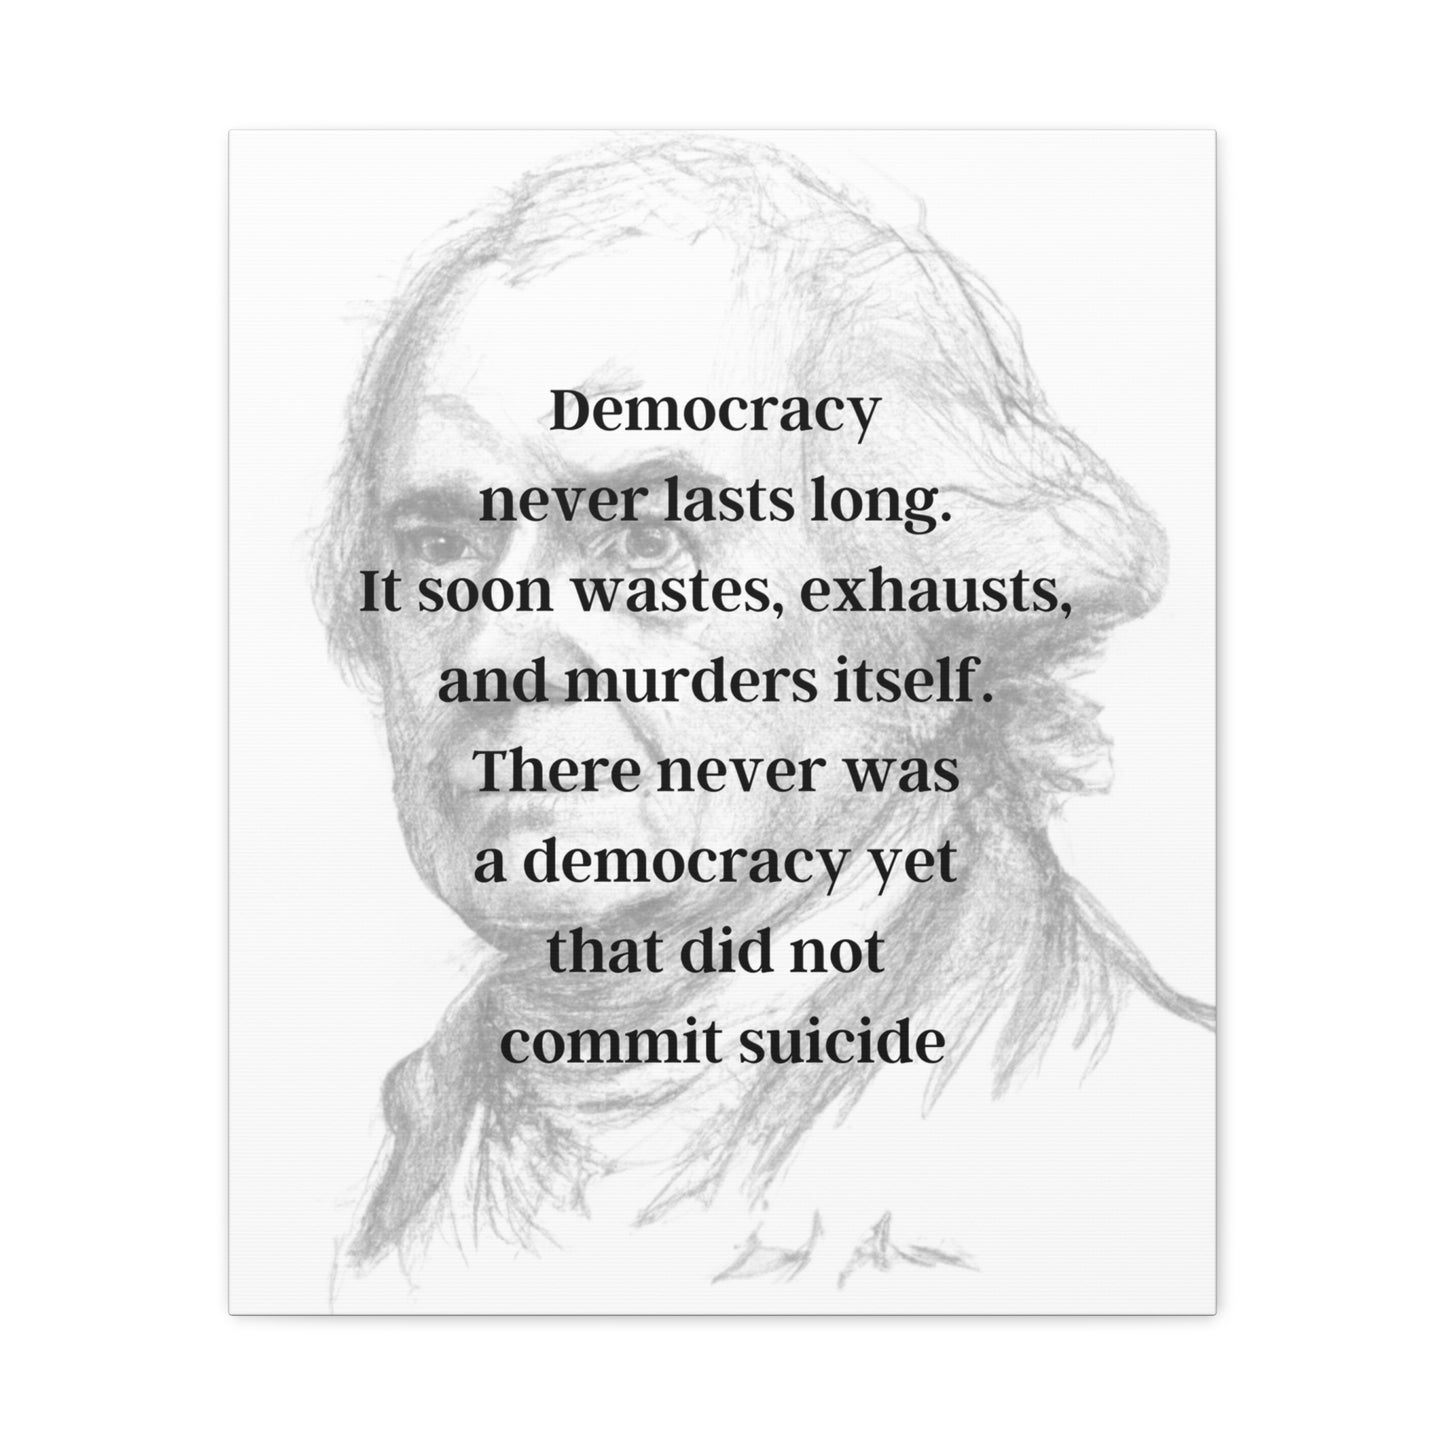 John Adams Quote 2, Canvas Art, Light Print, 2nd President of the United States, American Patriots, AI Art, Political Art, Canvas Prints, Presidential Portraits, Presidential Quotes, Inspirational Quotes